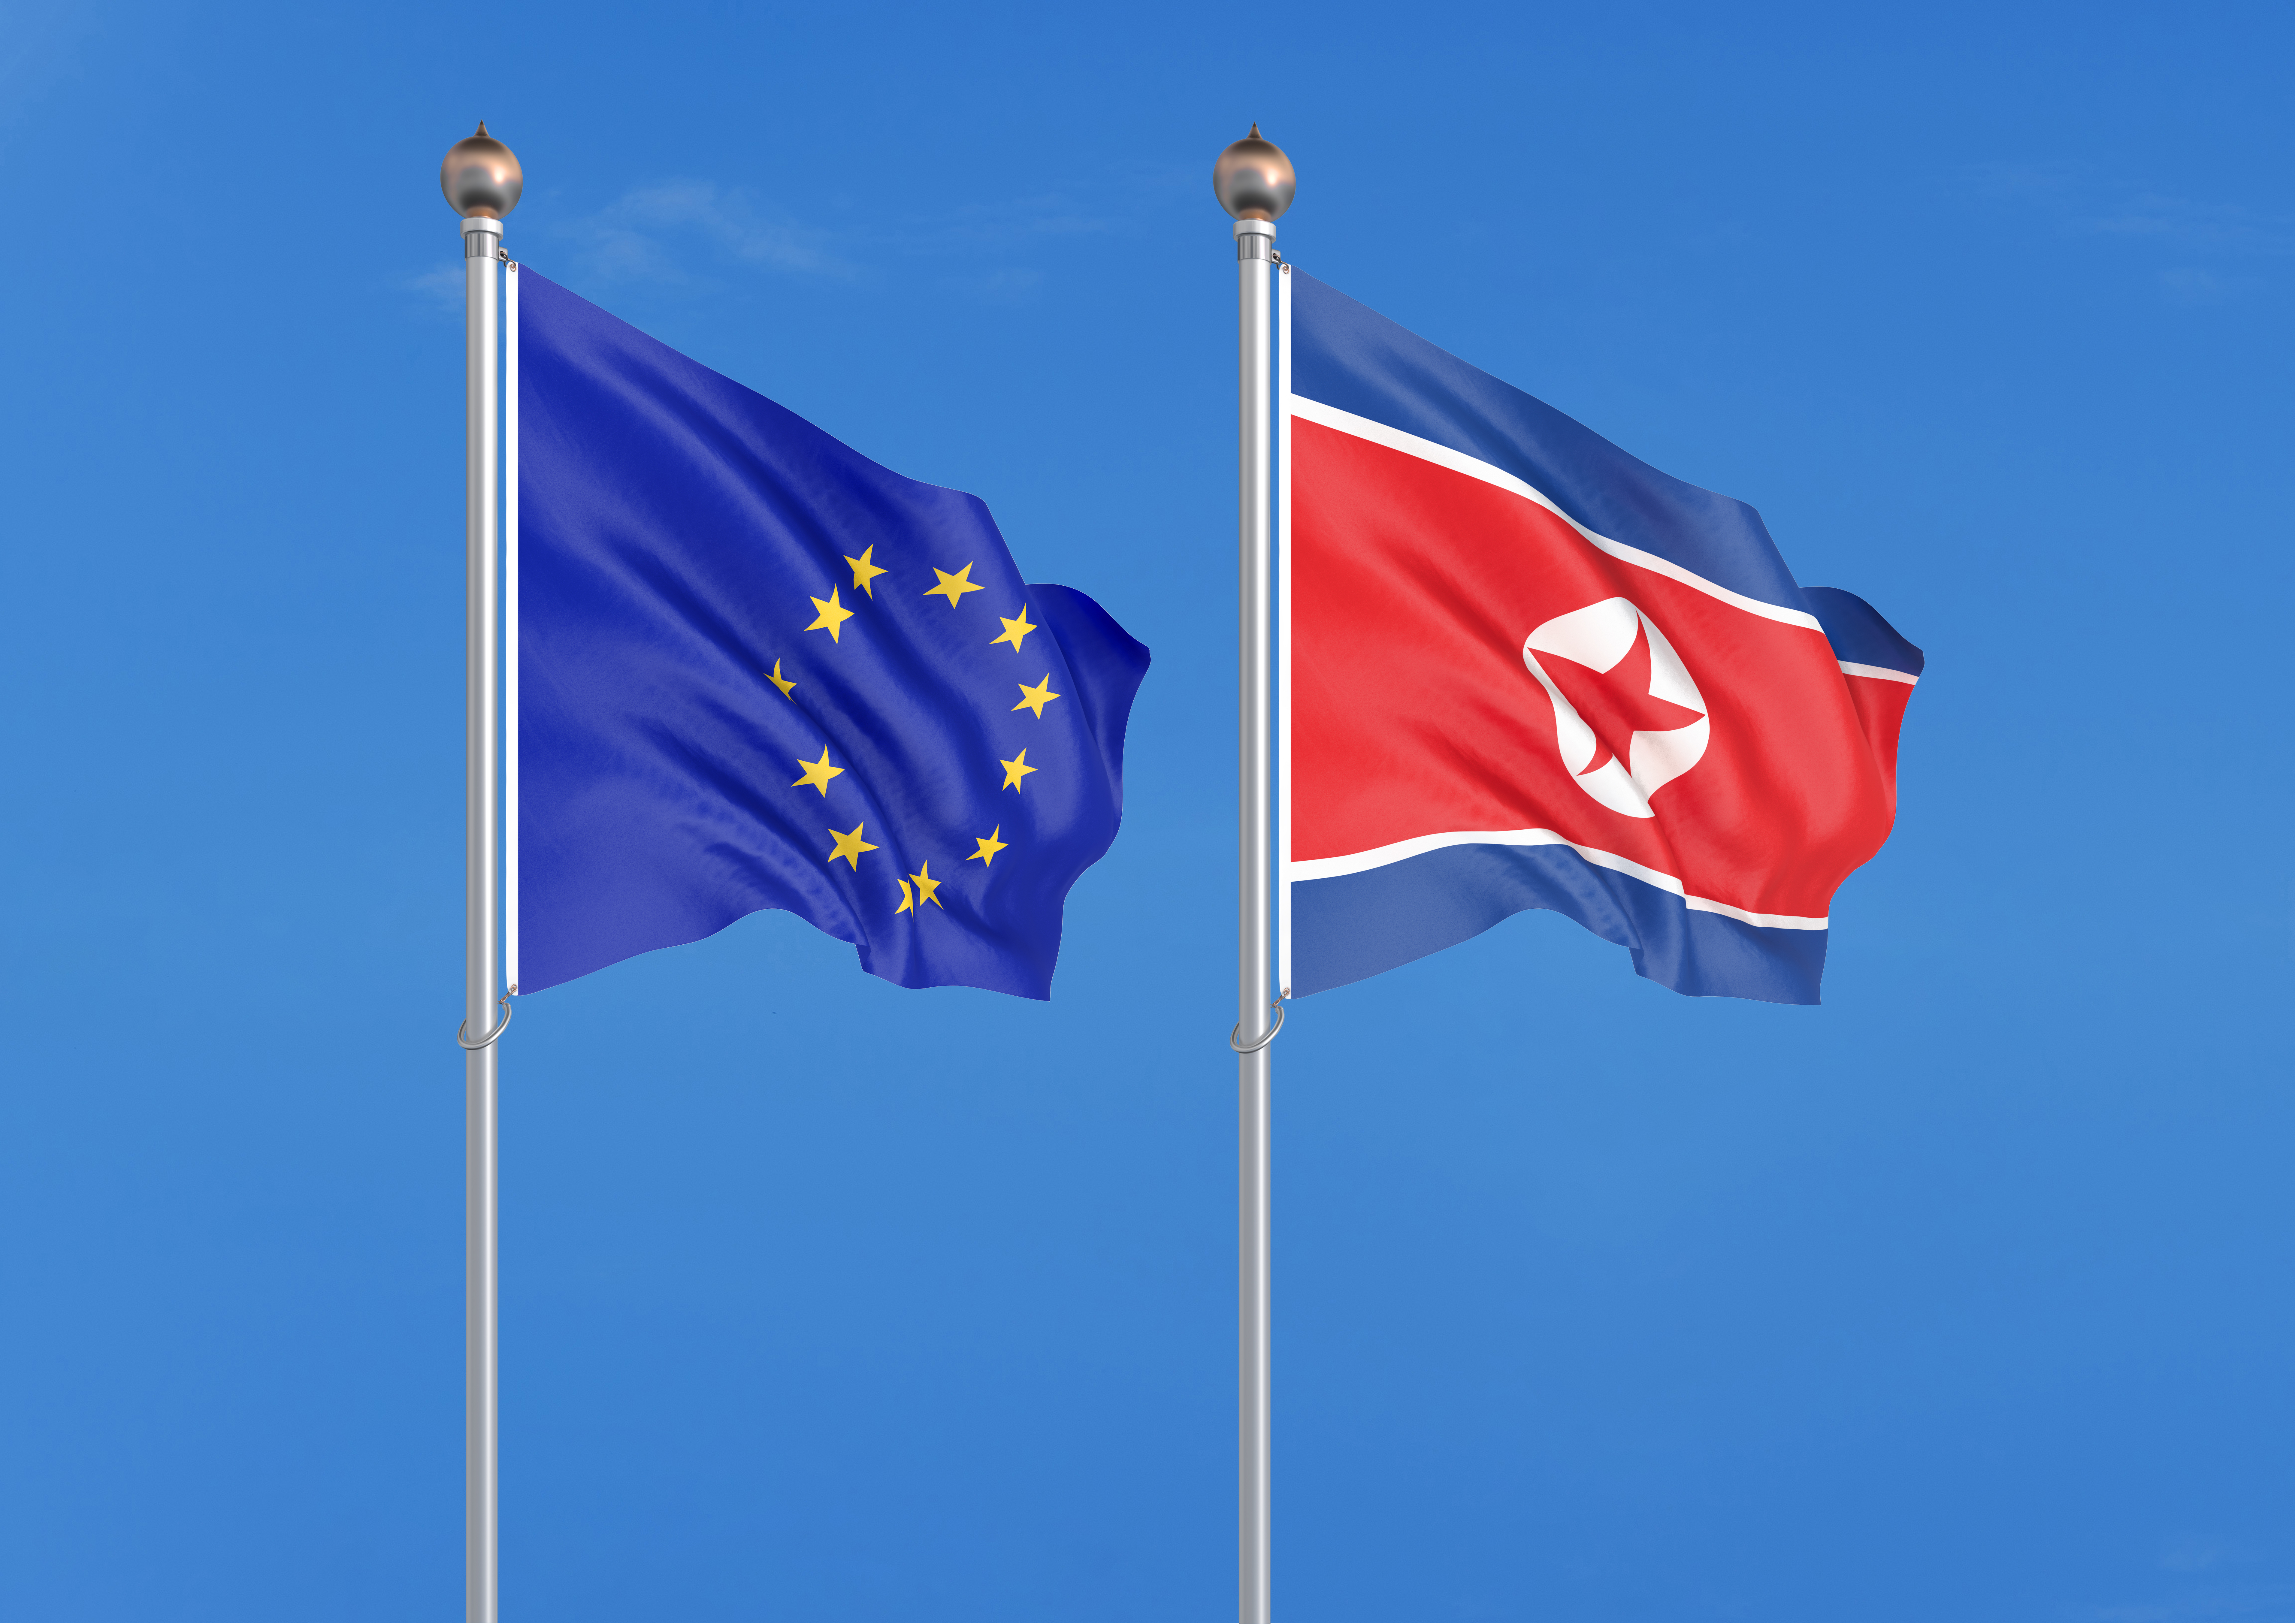 The EU’s North Korea Policy: From Engagement, to Critical Engagement, and to Criticism with Limited Engagement